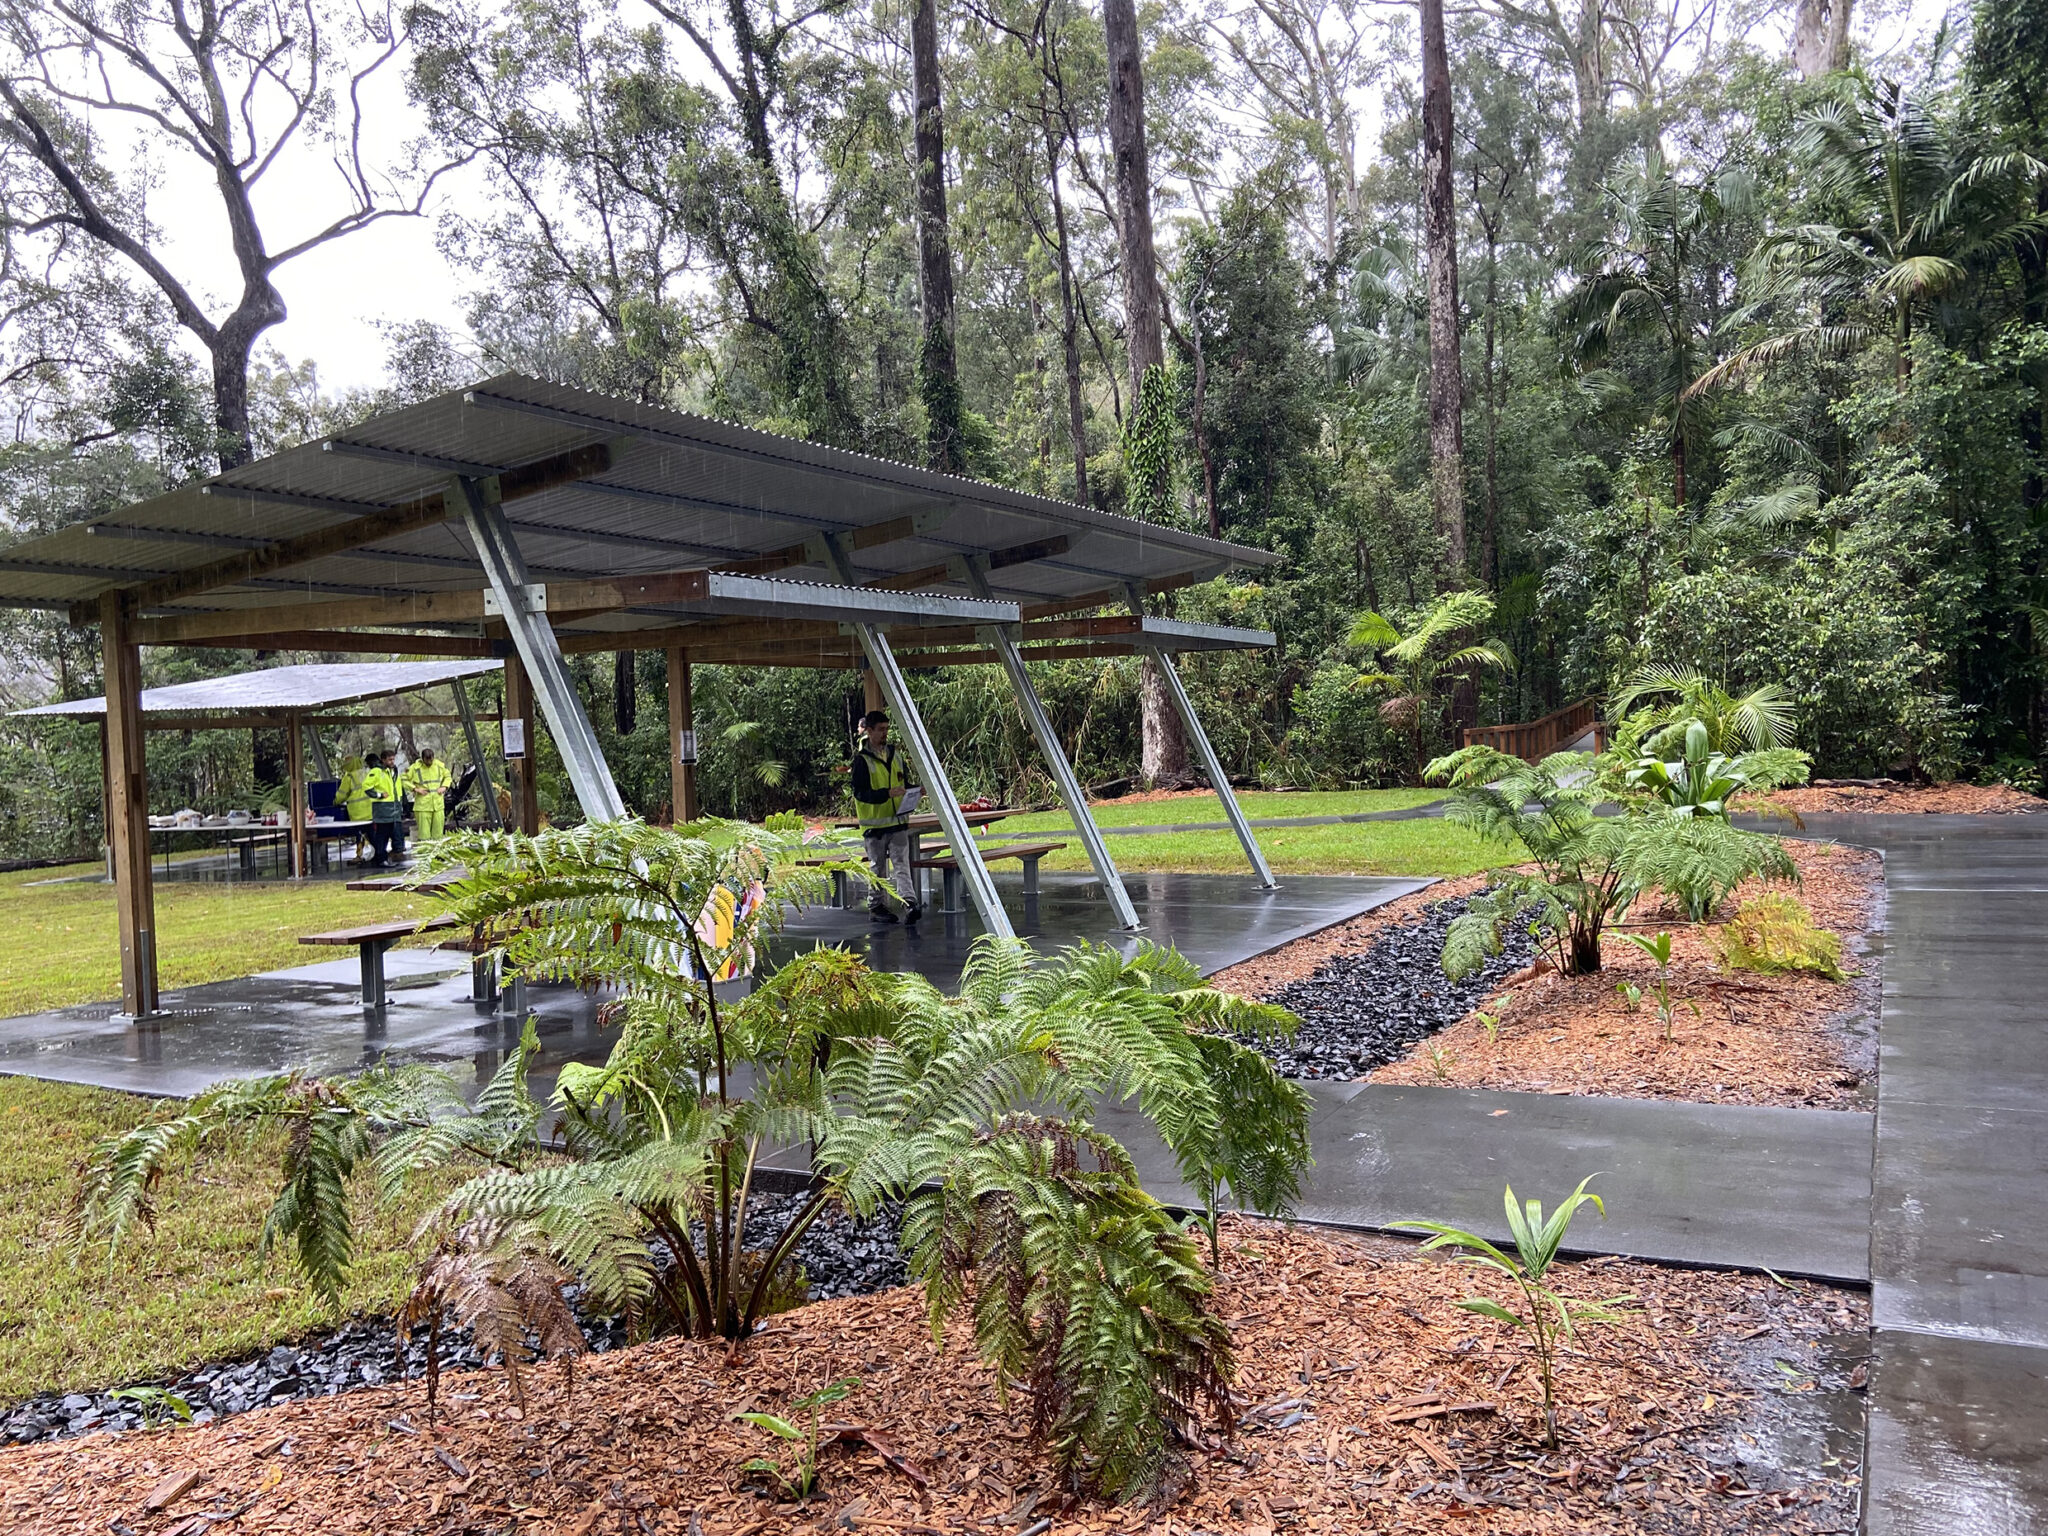 New Picnic Shelters